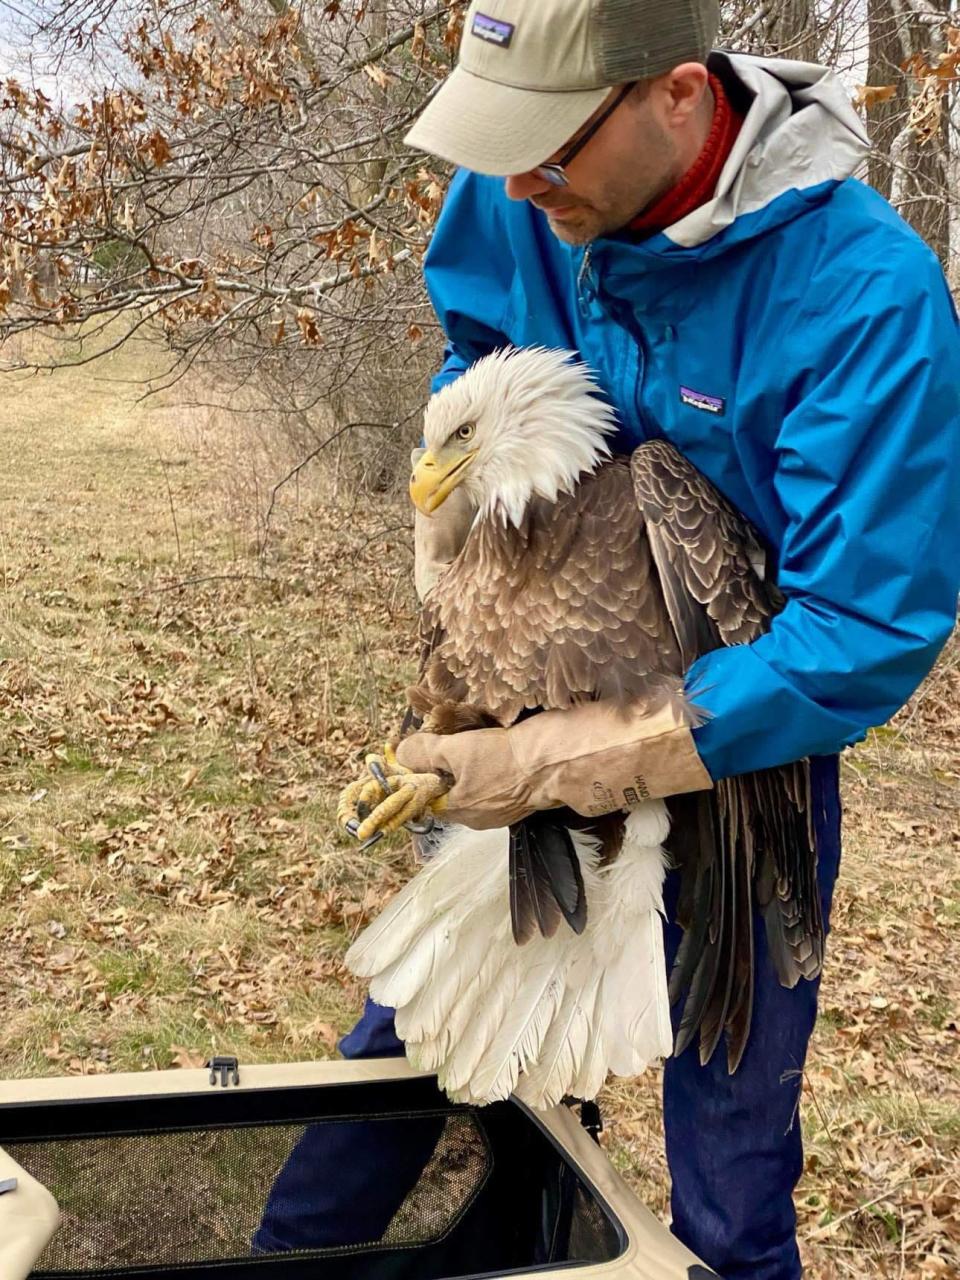 Dylan Hughes, a volunteer with Hoo's Woods Raptor Center in Whitewater, holds a bald eagle recovered March 14 near Brooklyn in Dane County. The bird, which was illegally shot and also suffering from lead poisoning, died the next day.